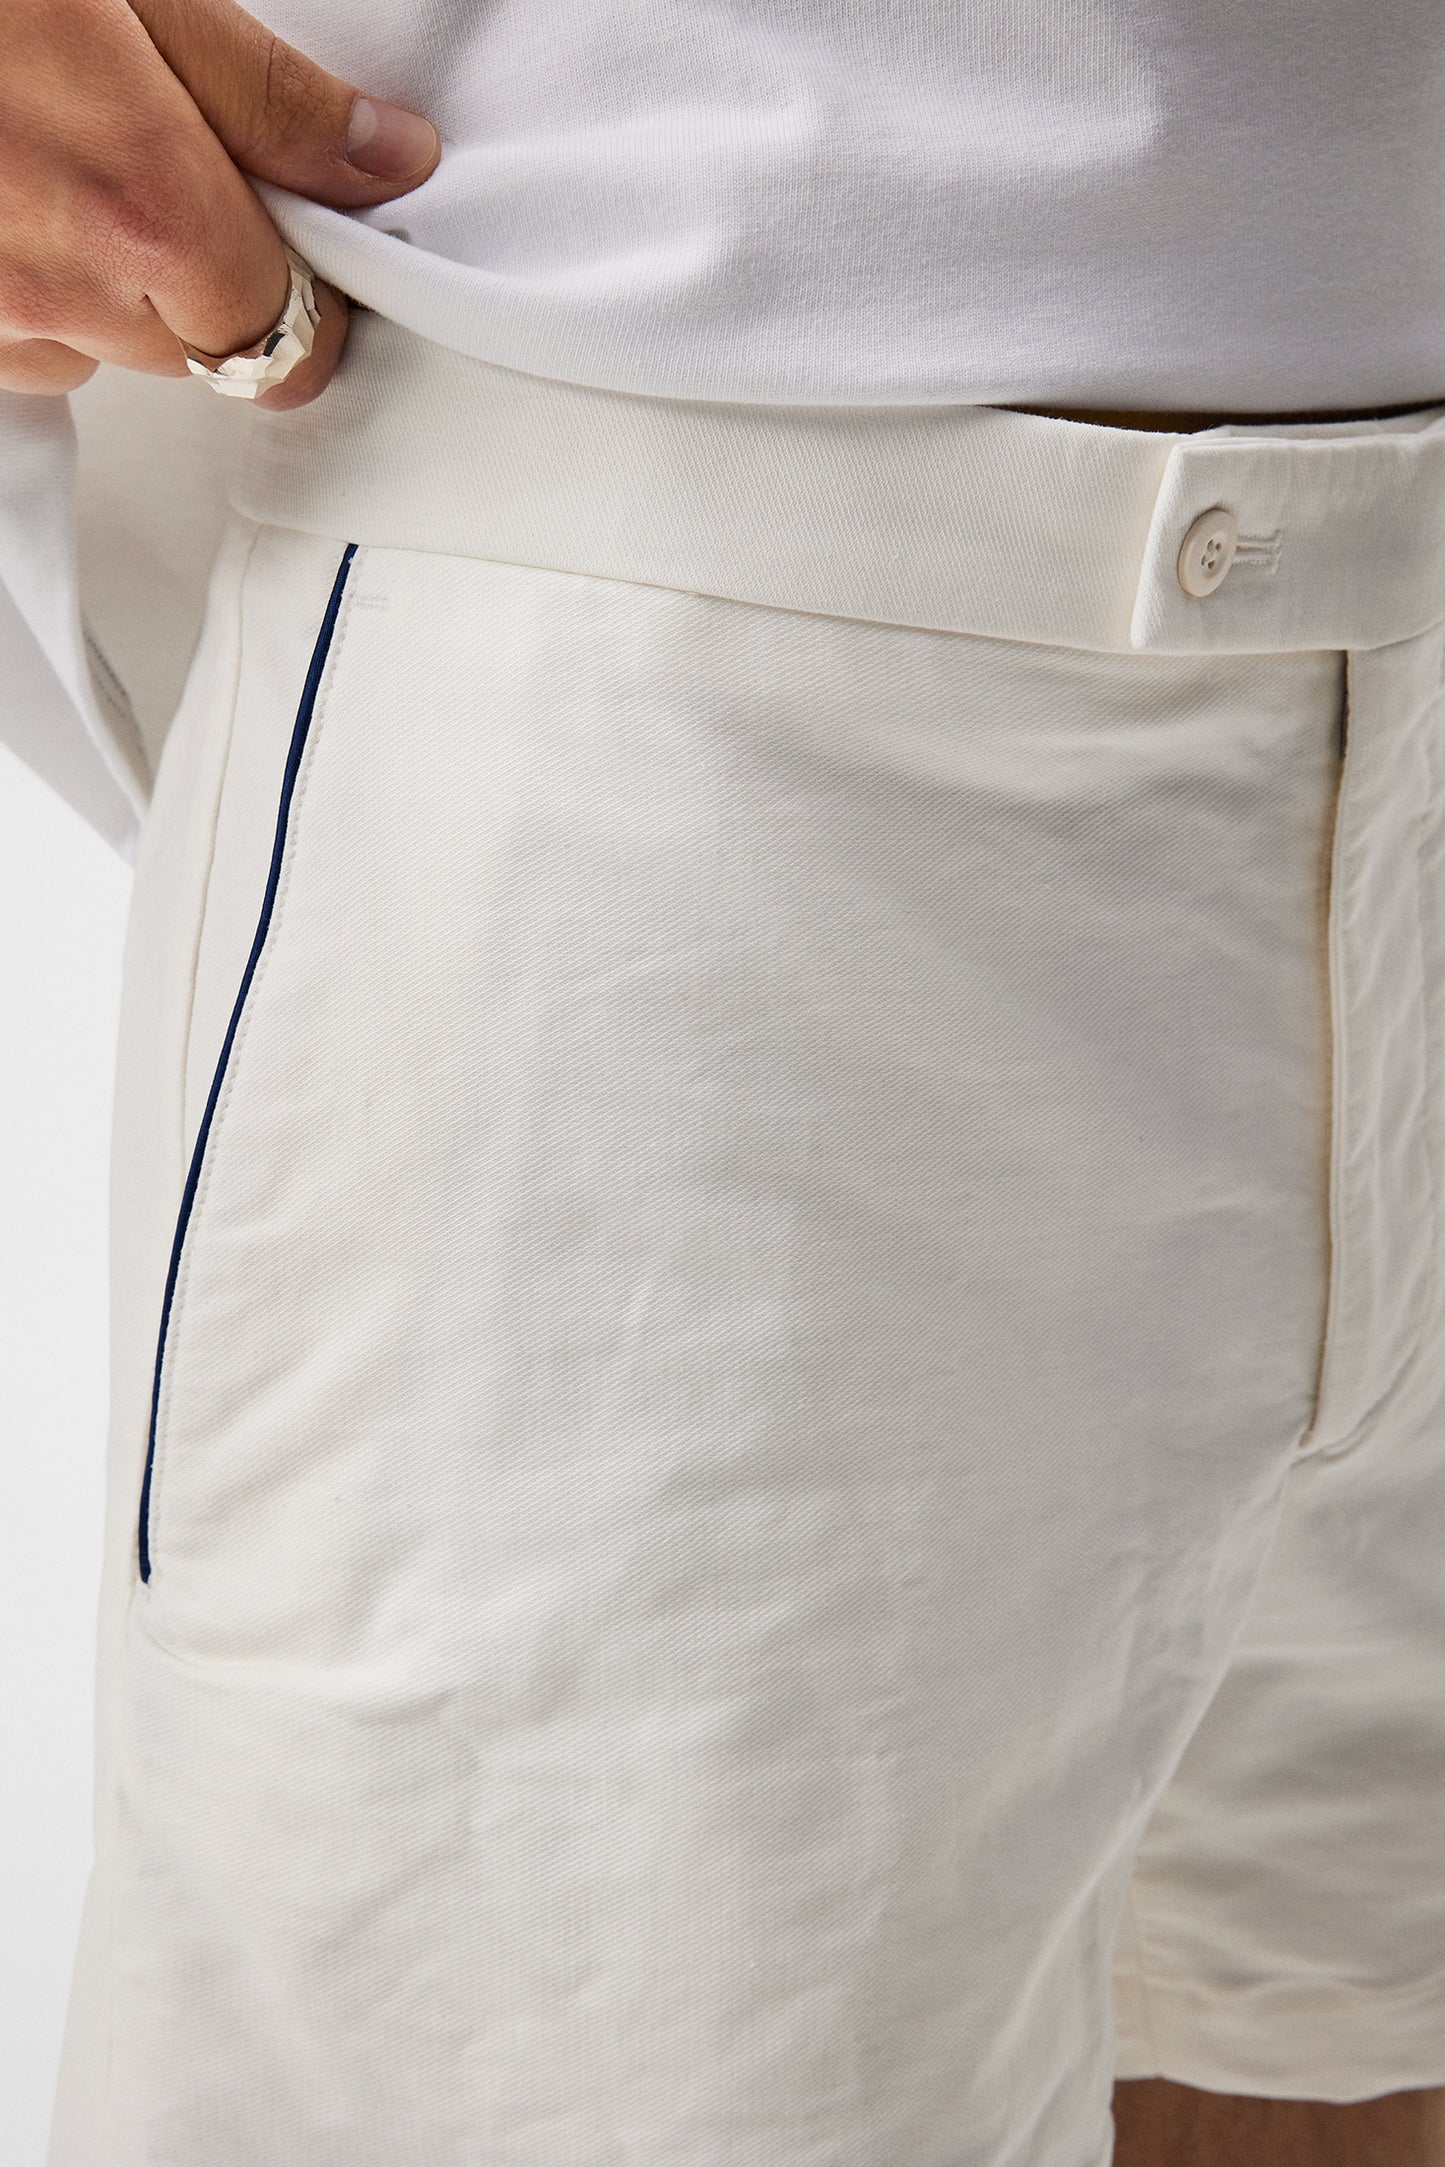 Andy Tennis Shorts / White